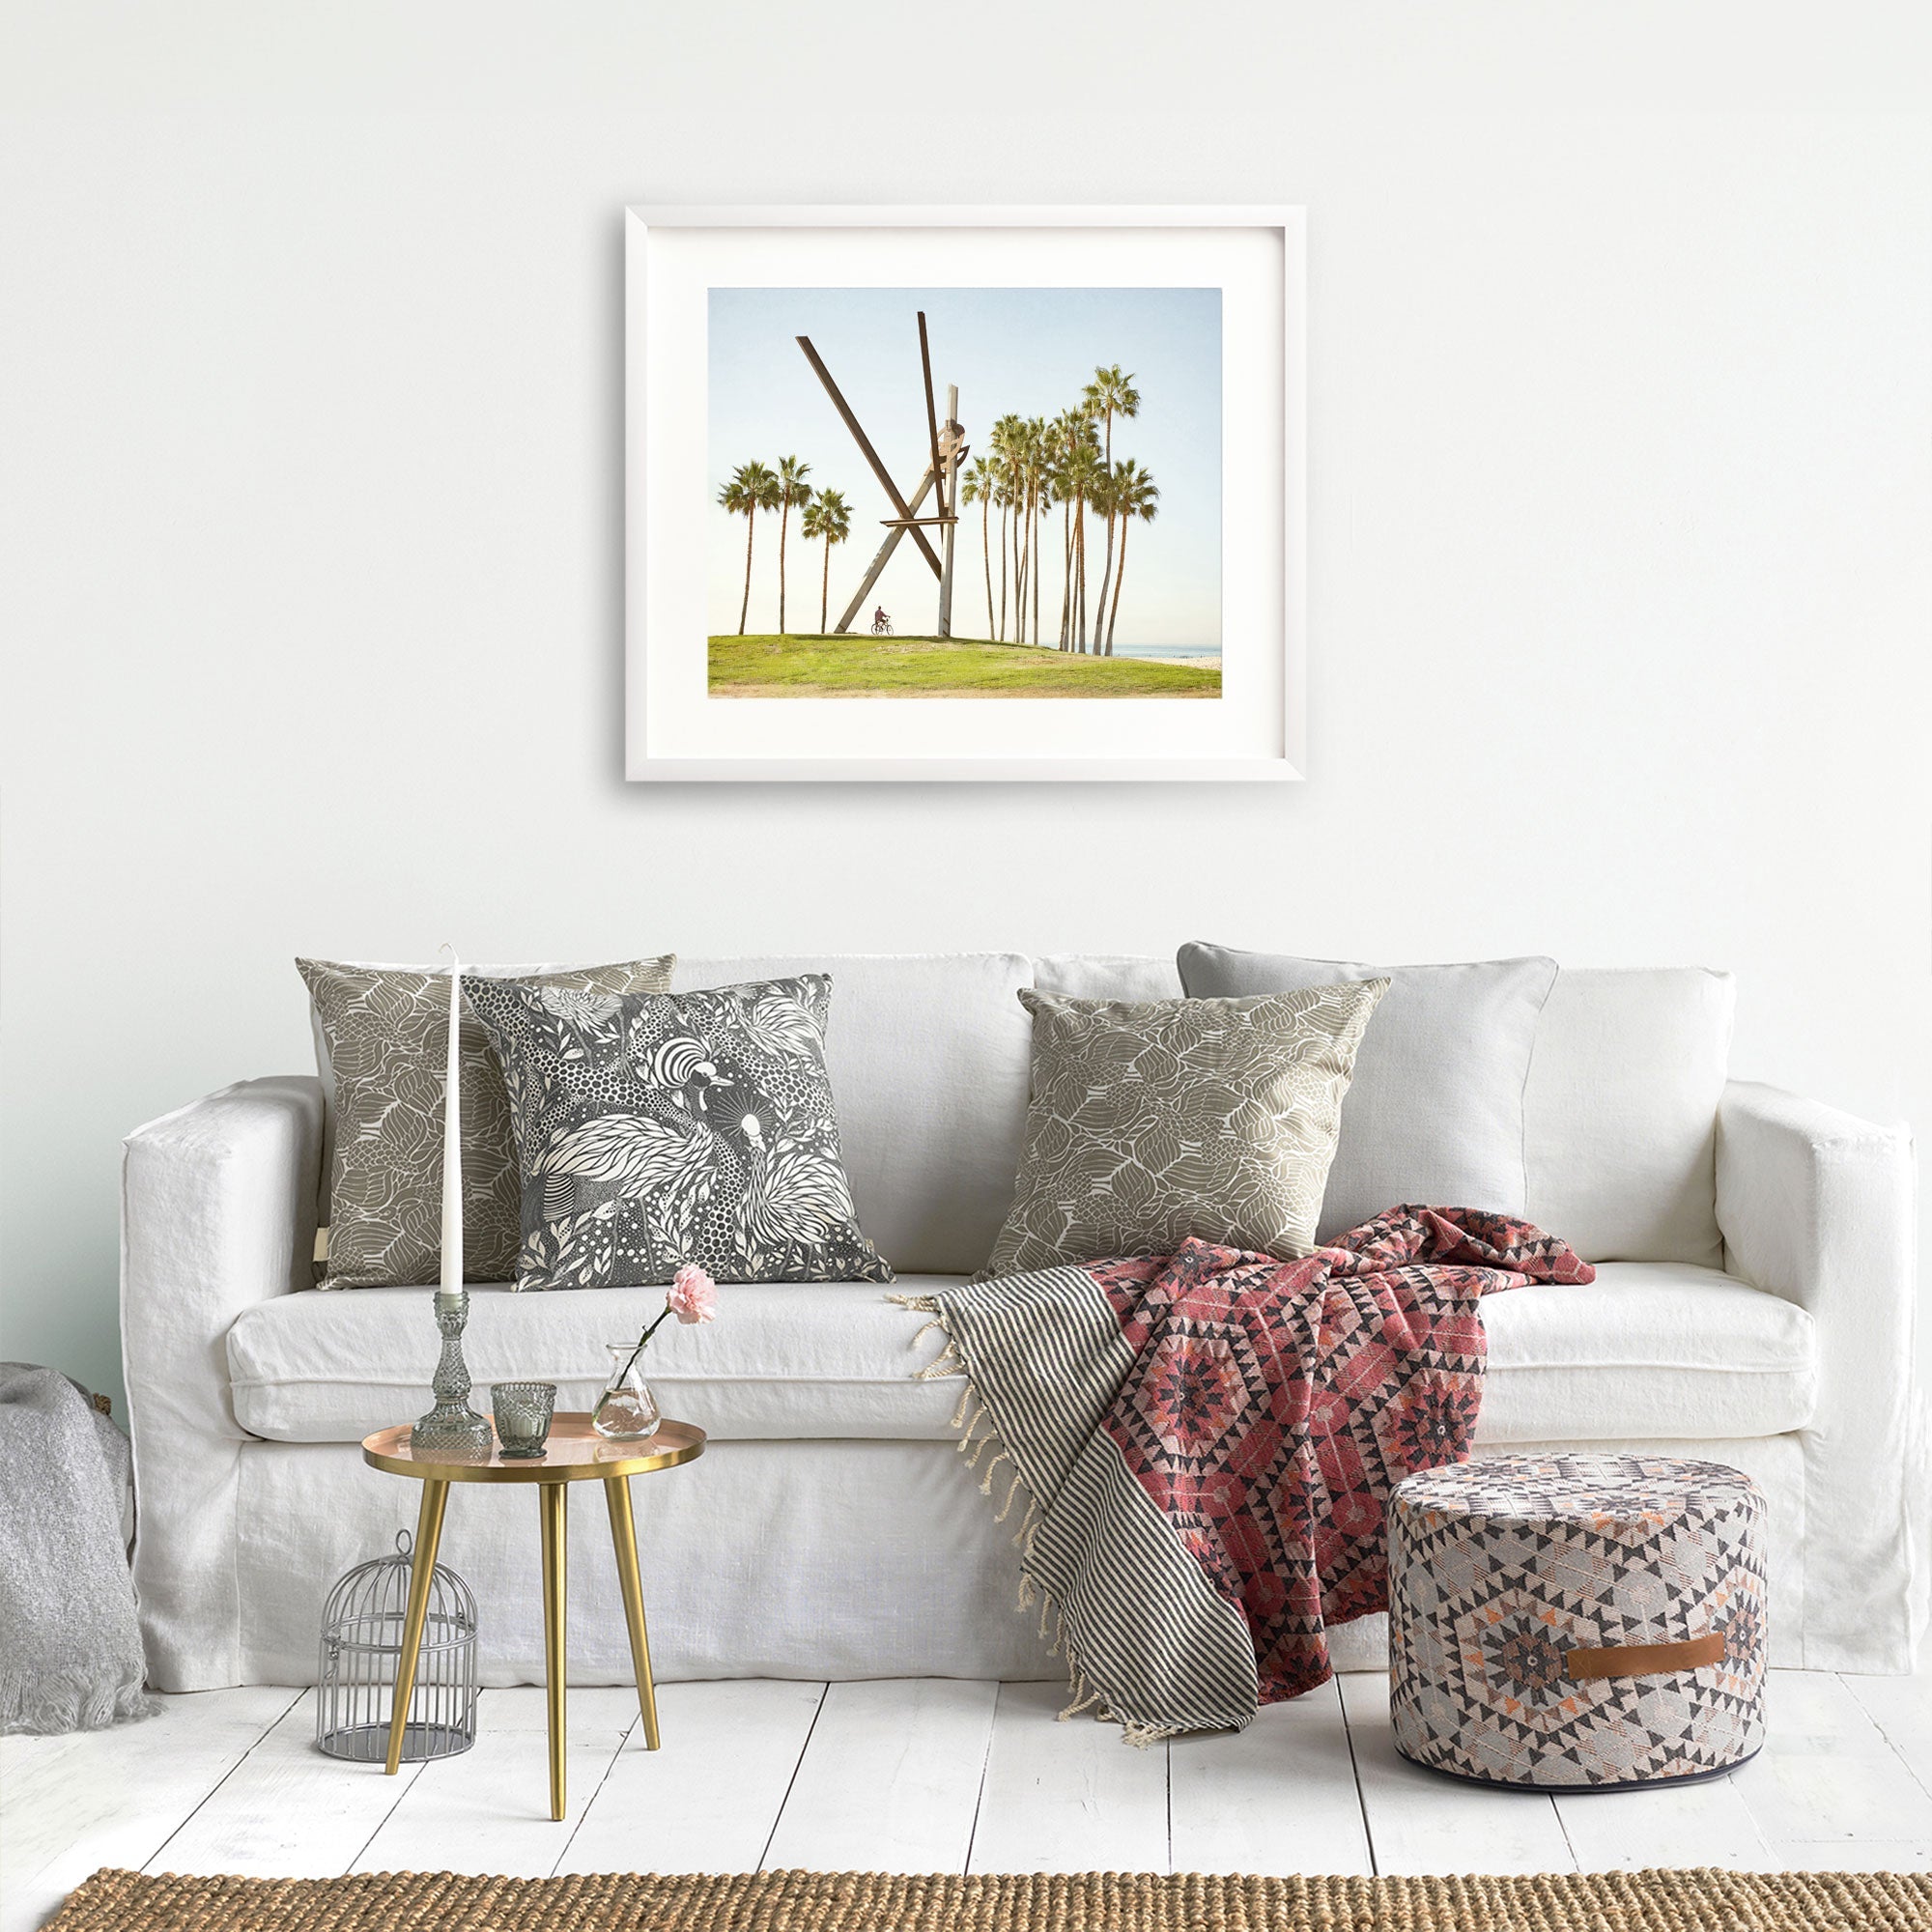 A cozy living room featuring a white sofa with decorative pillows, a red patterned throw blanket, a small gold side table, and an unframed Offley Green Venice Beach Landmark Sculpture, 'V is for Venice' photography hanging above the couch.